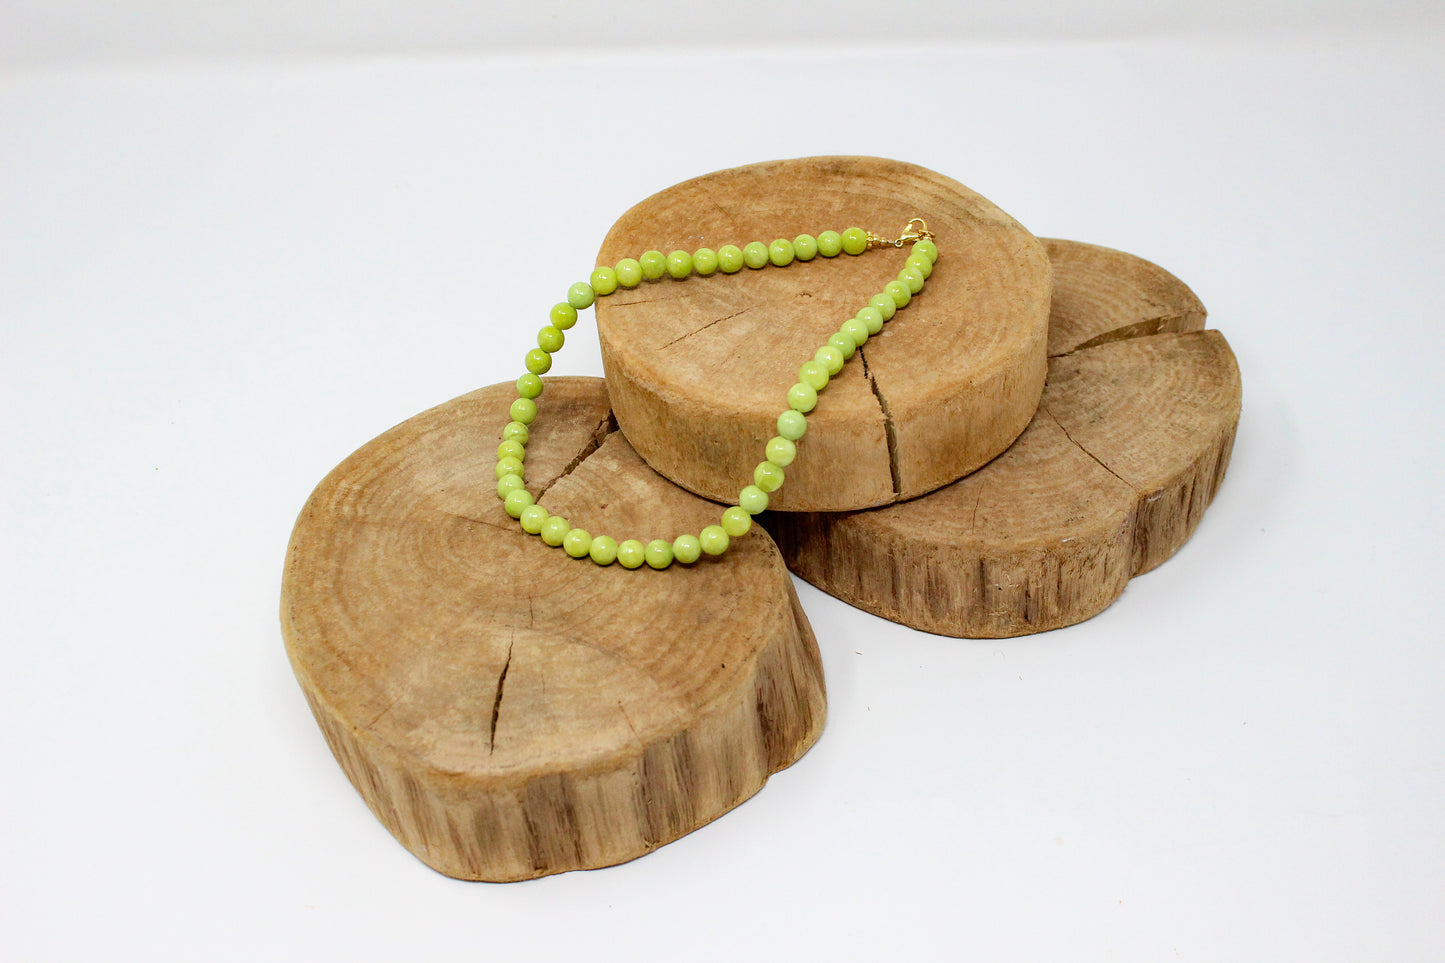 8mm Lime Green Glass Bead Necklace